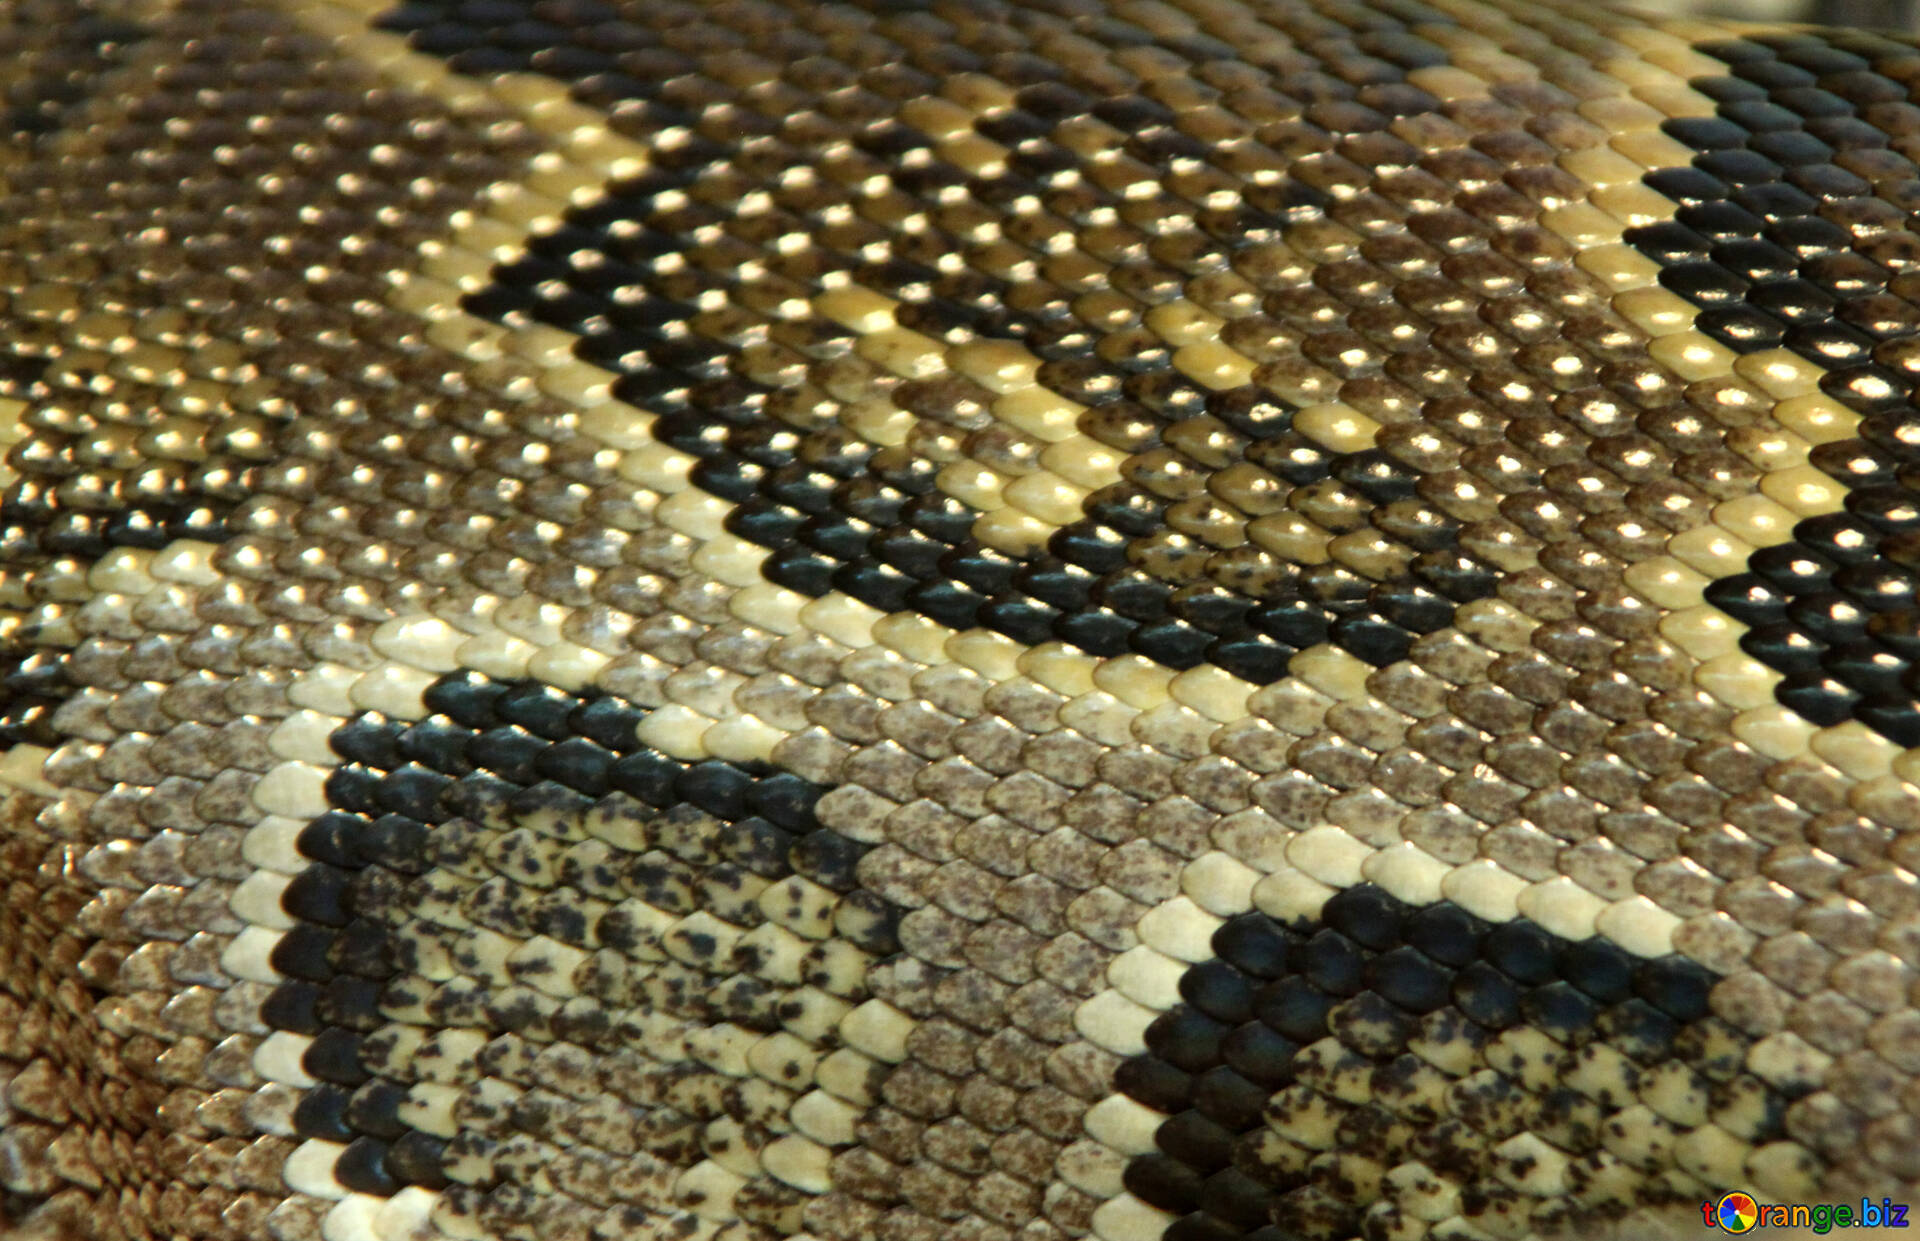  Texture  snake  skin  the texture  pattern skins snakes 